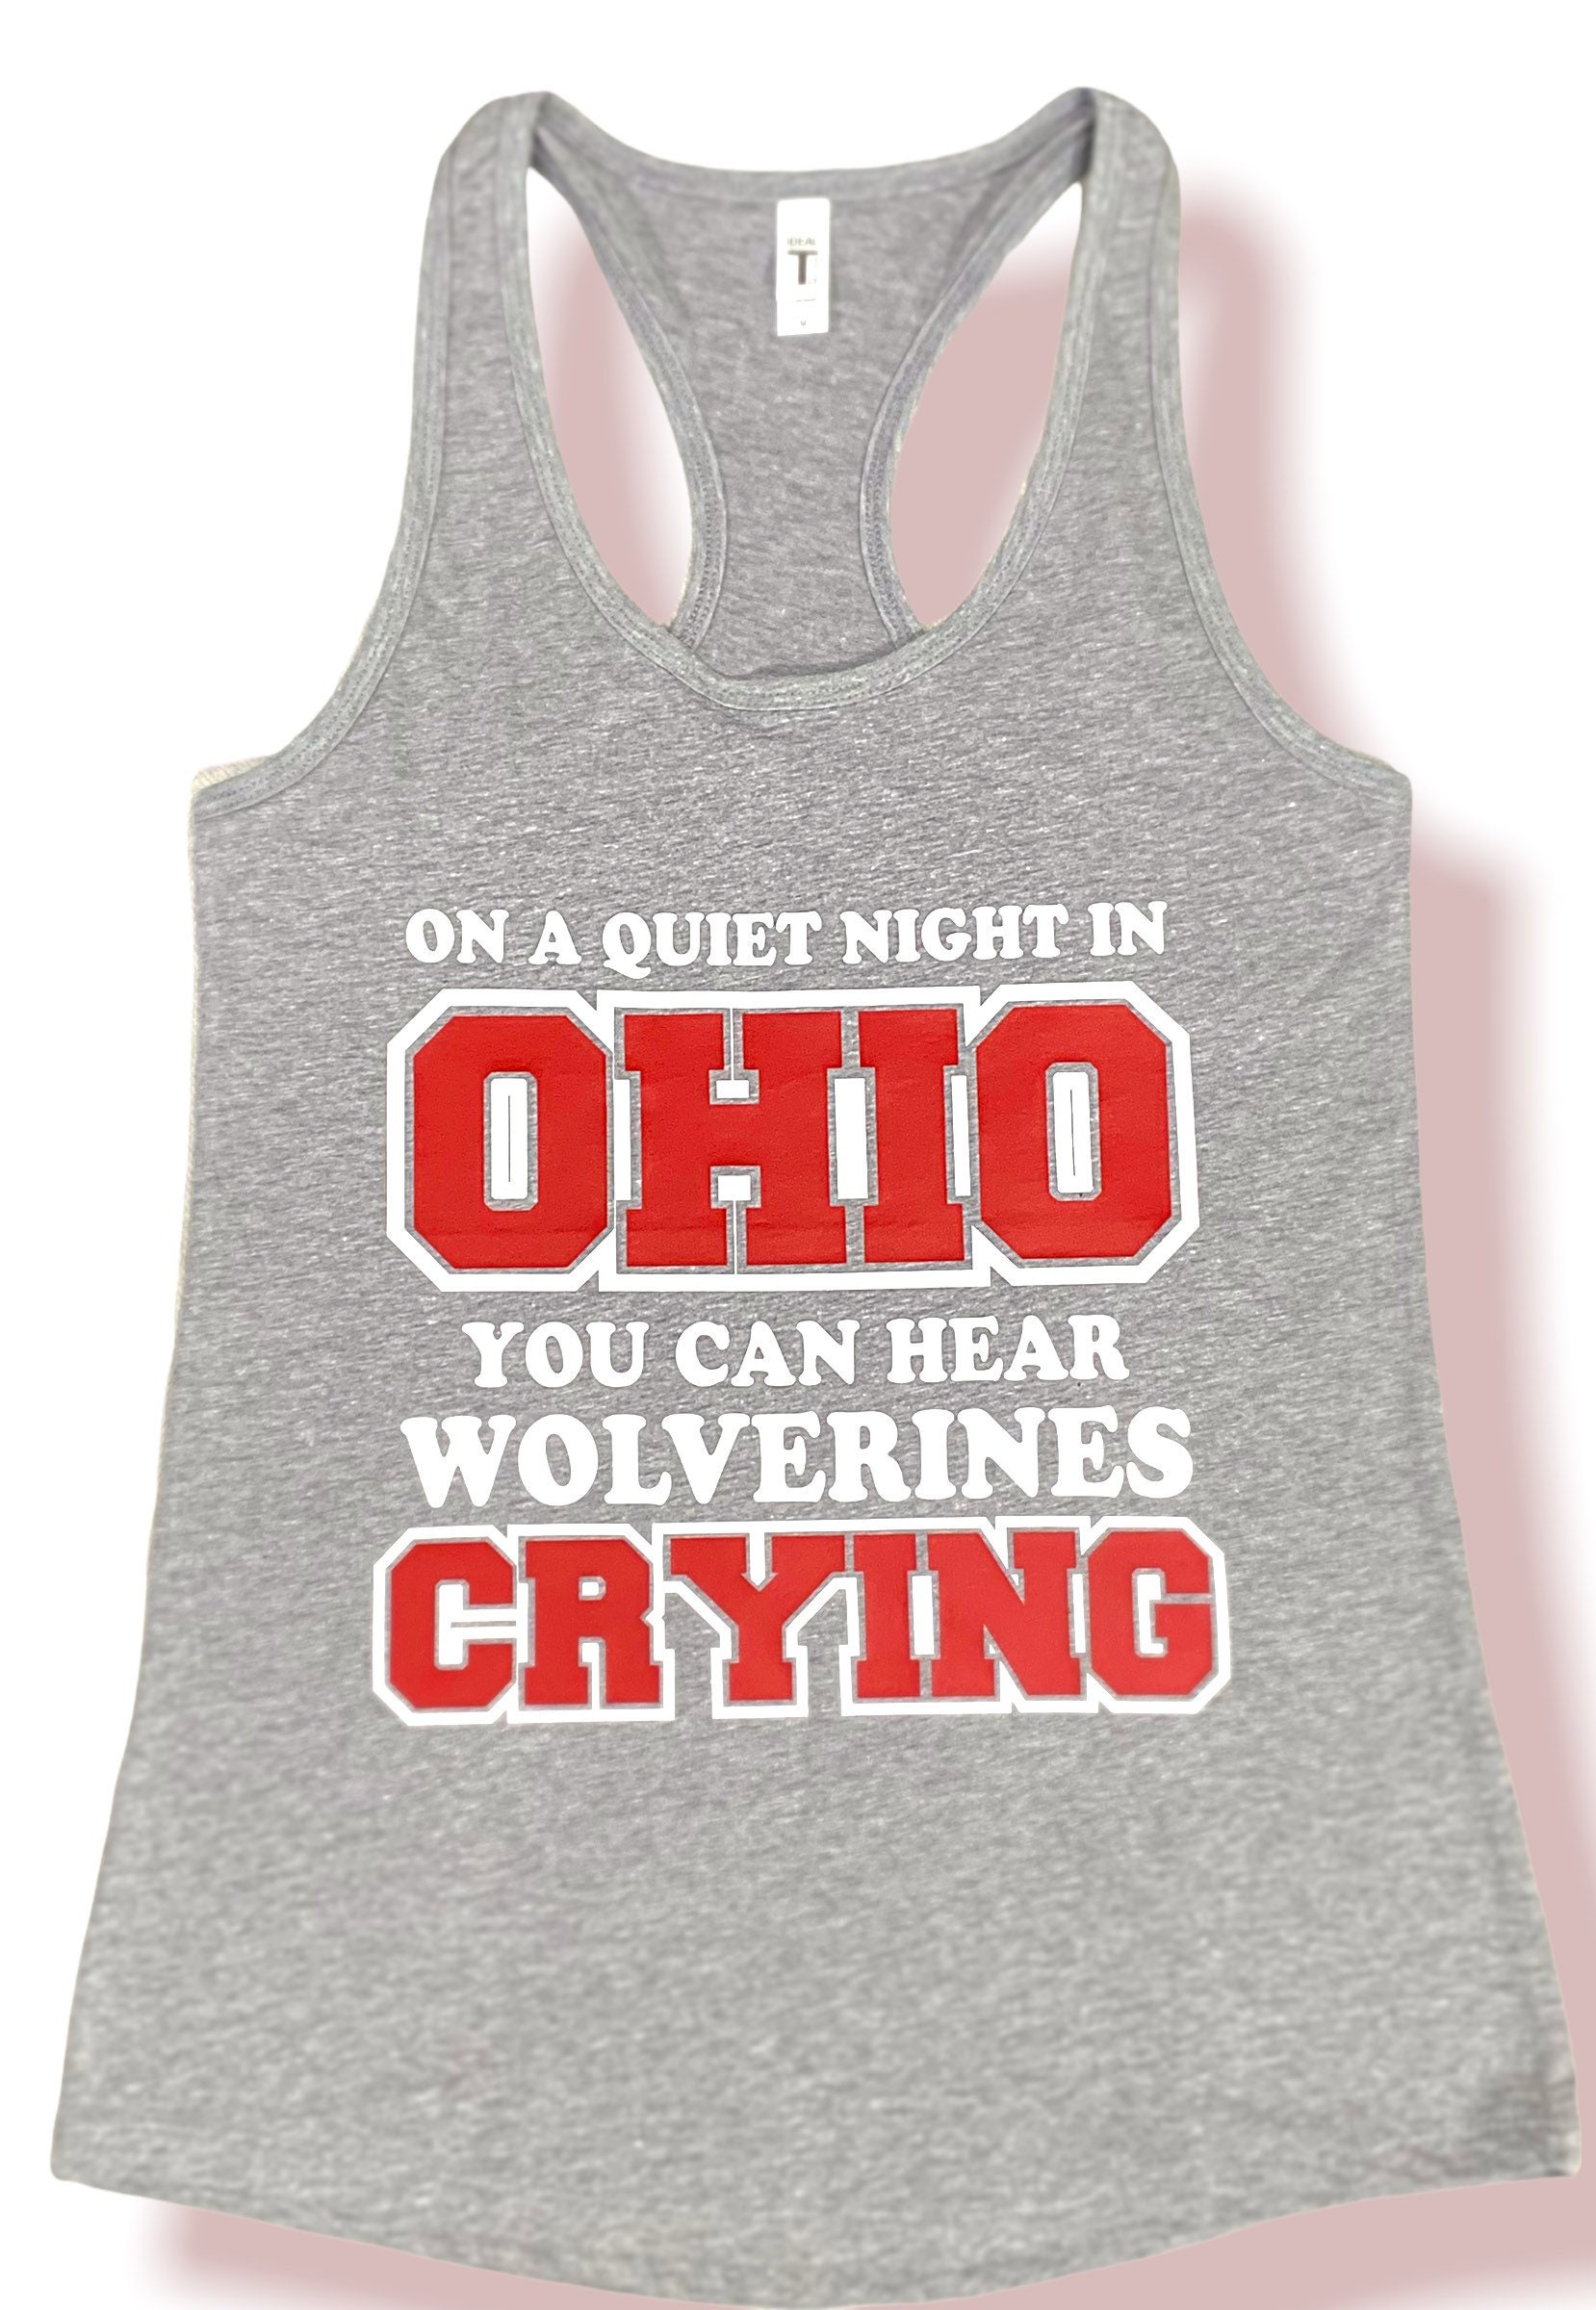 ZooZatz Ladies Ohio State Buckeyes Arched Muscle Tank Top / X-Large